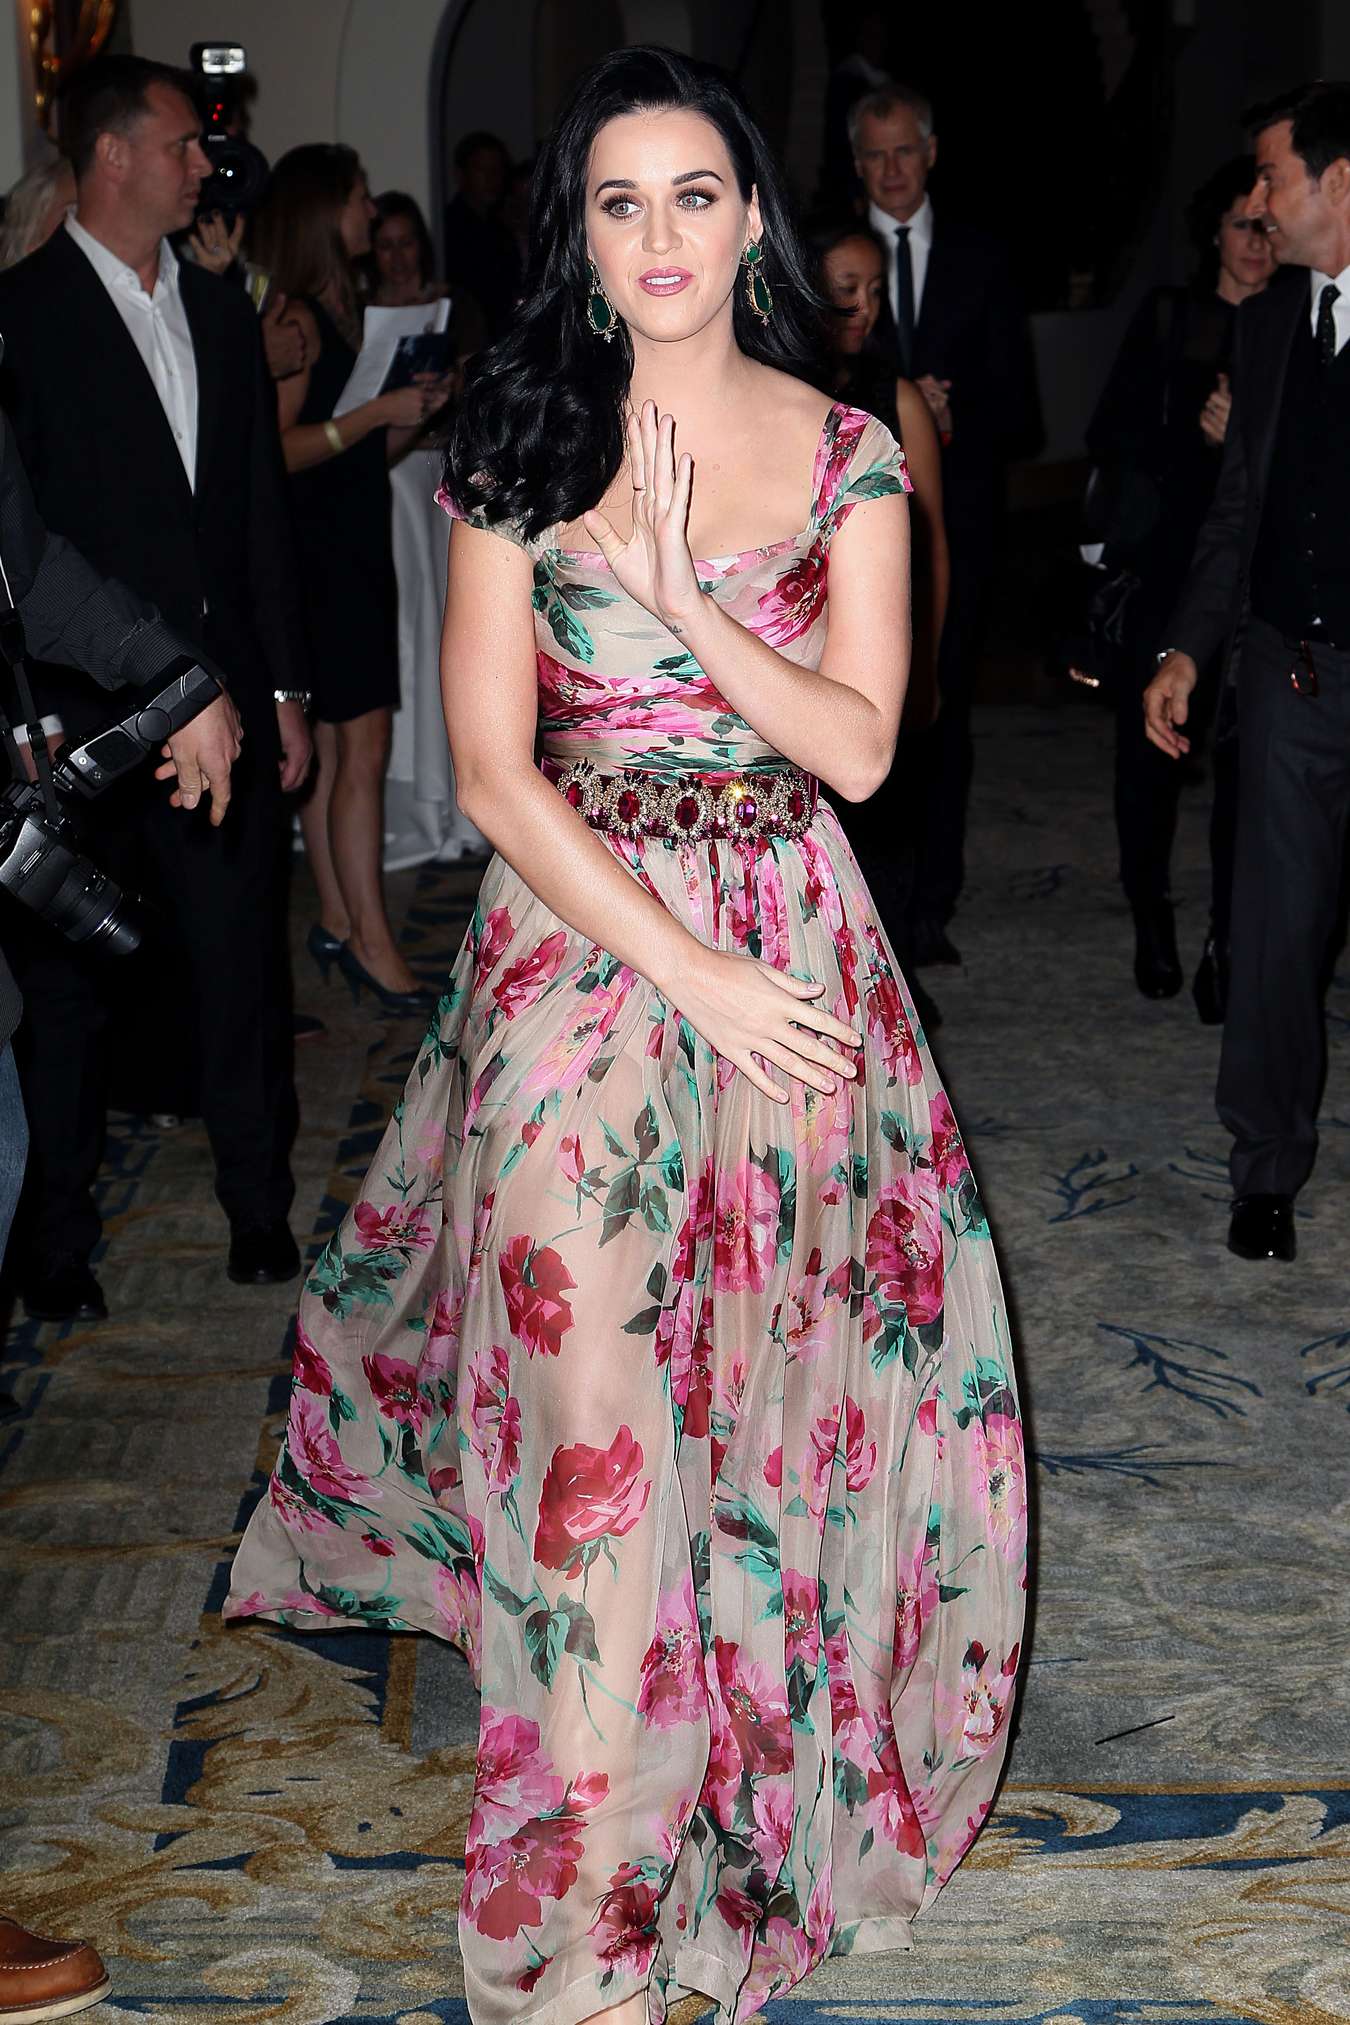 Katy Perry 2012 : Katy Perry – 2012 Dream Foundation Celebration Of Dreams event in California-02